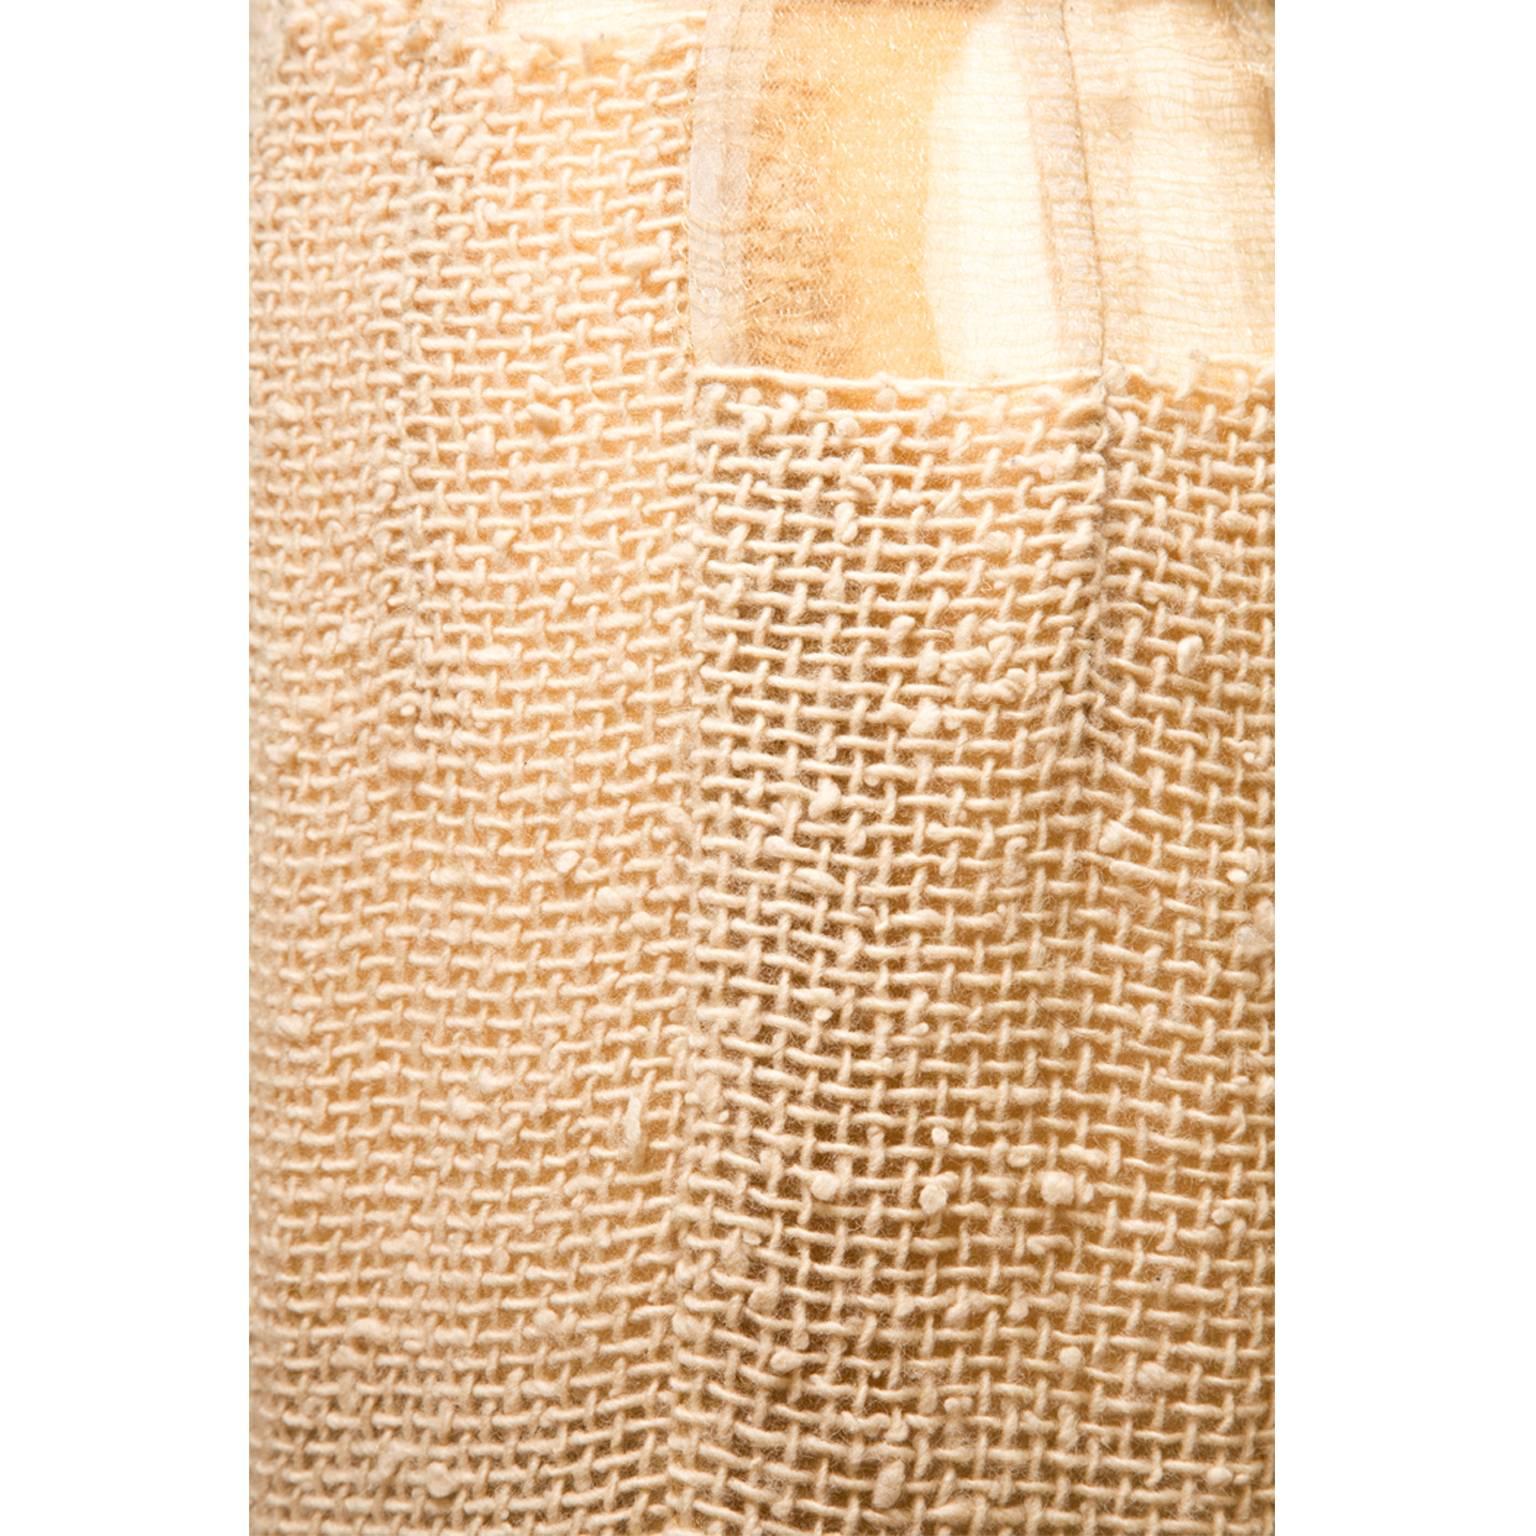 Comme des Garcons Woven Gold Beige Patchwork Skirt AD1997 In Good Condition For Sale In Berlin, DE